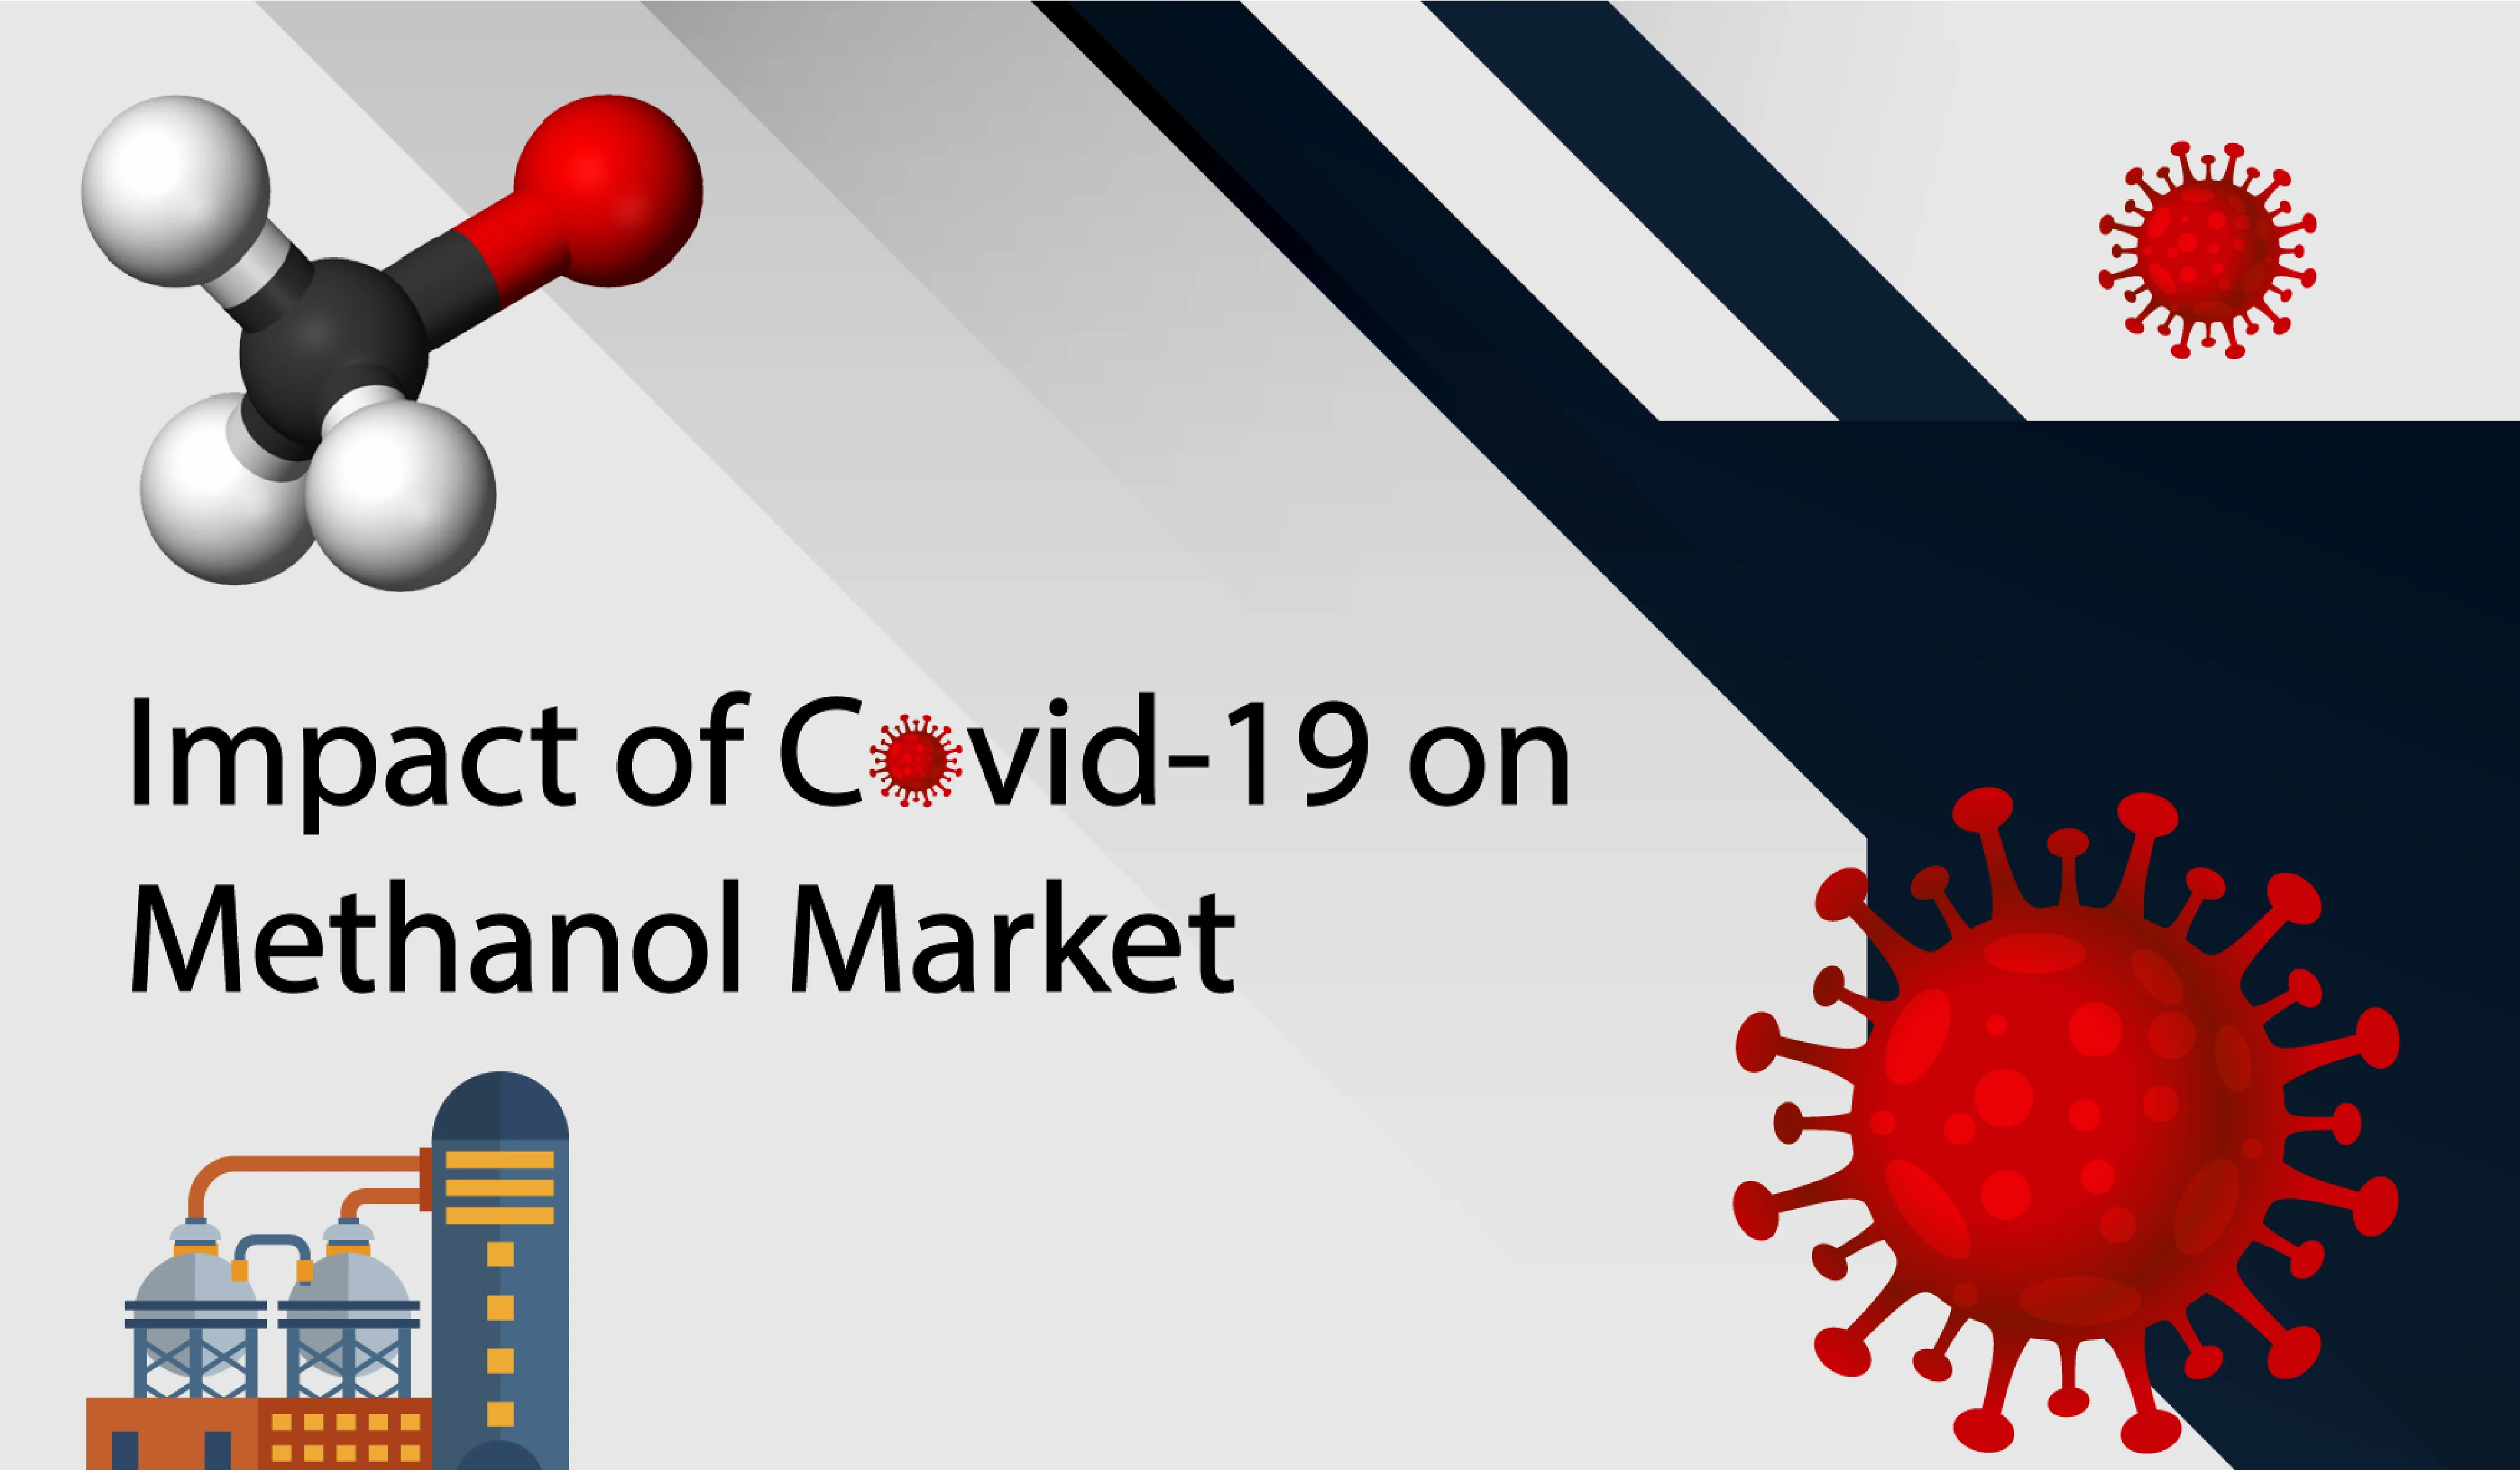 Analysis of the Impact of Covid-19 on Methanol Market